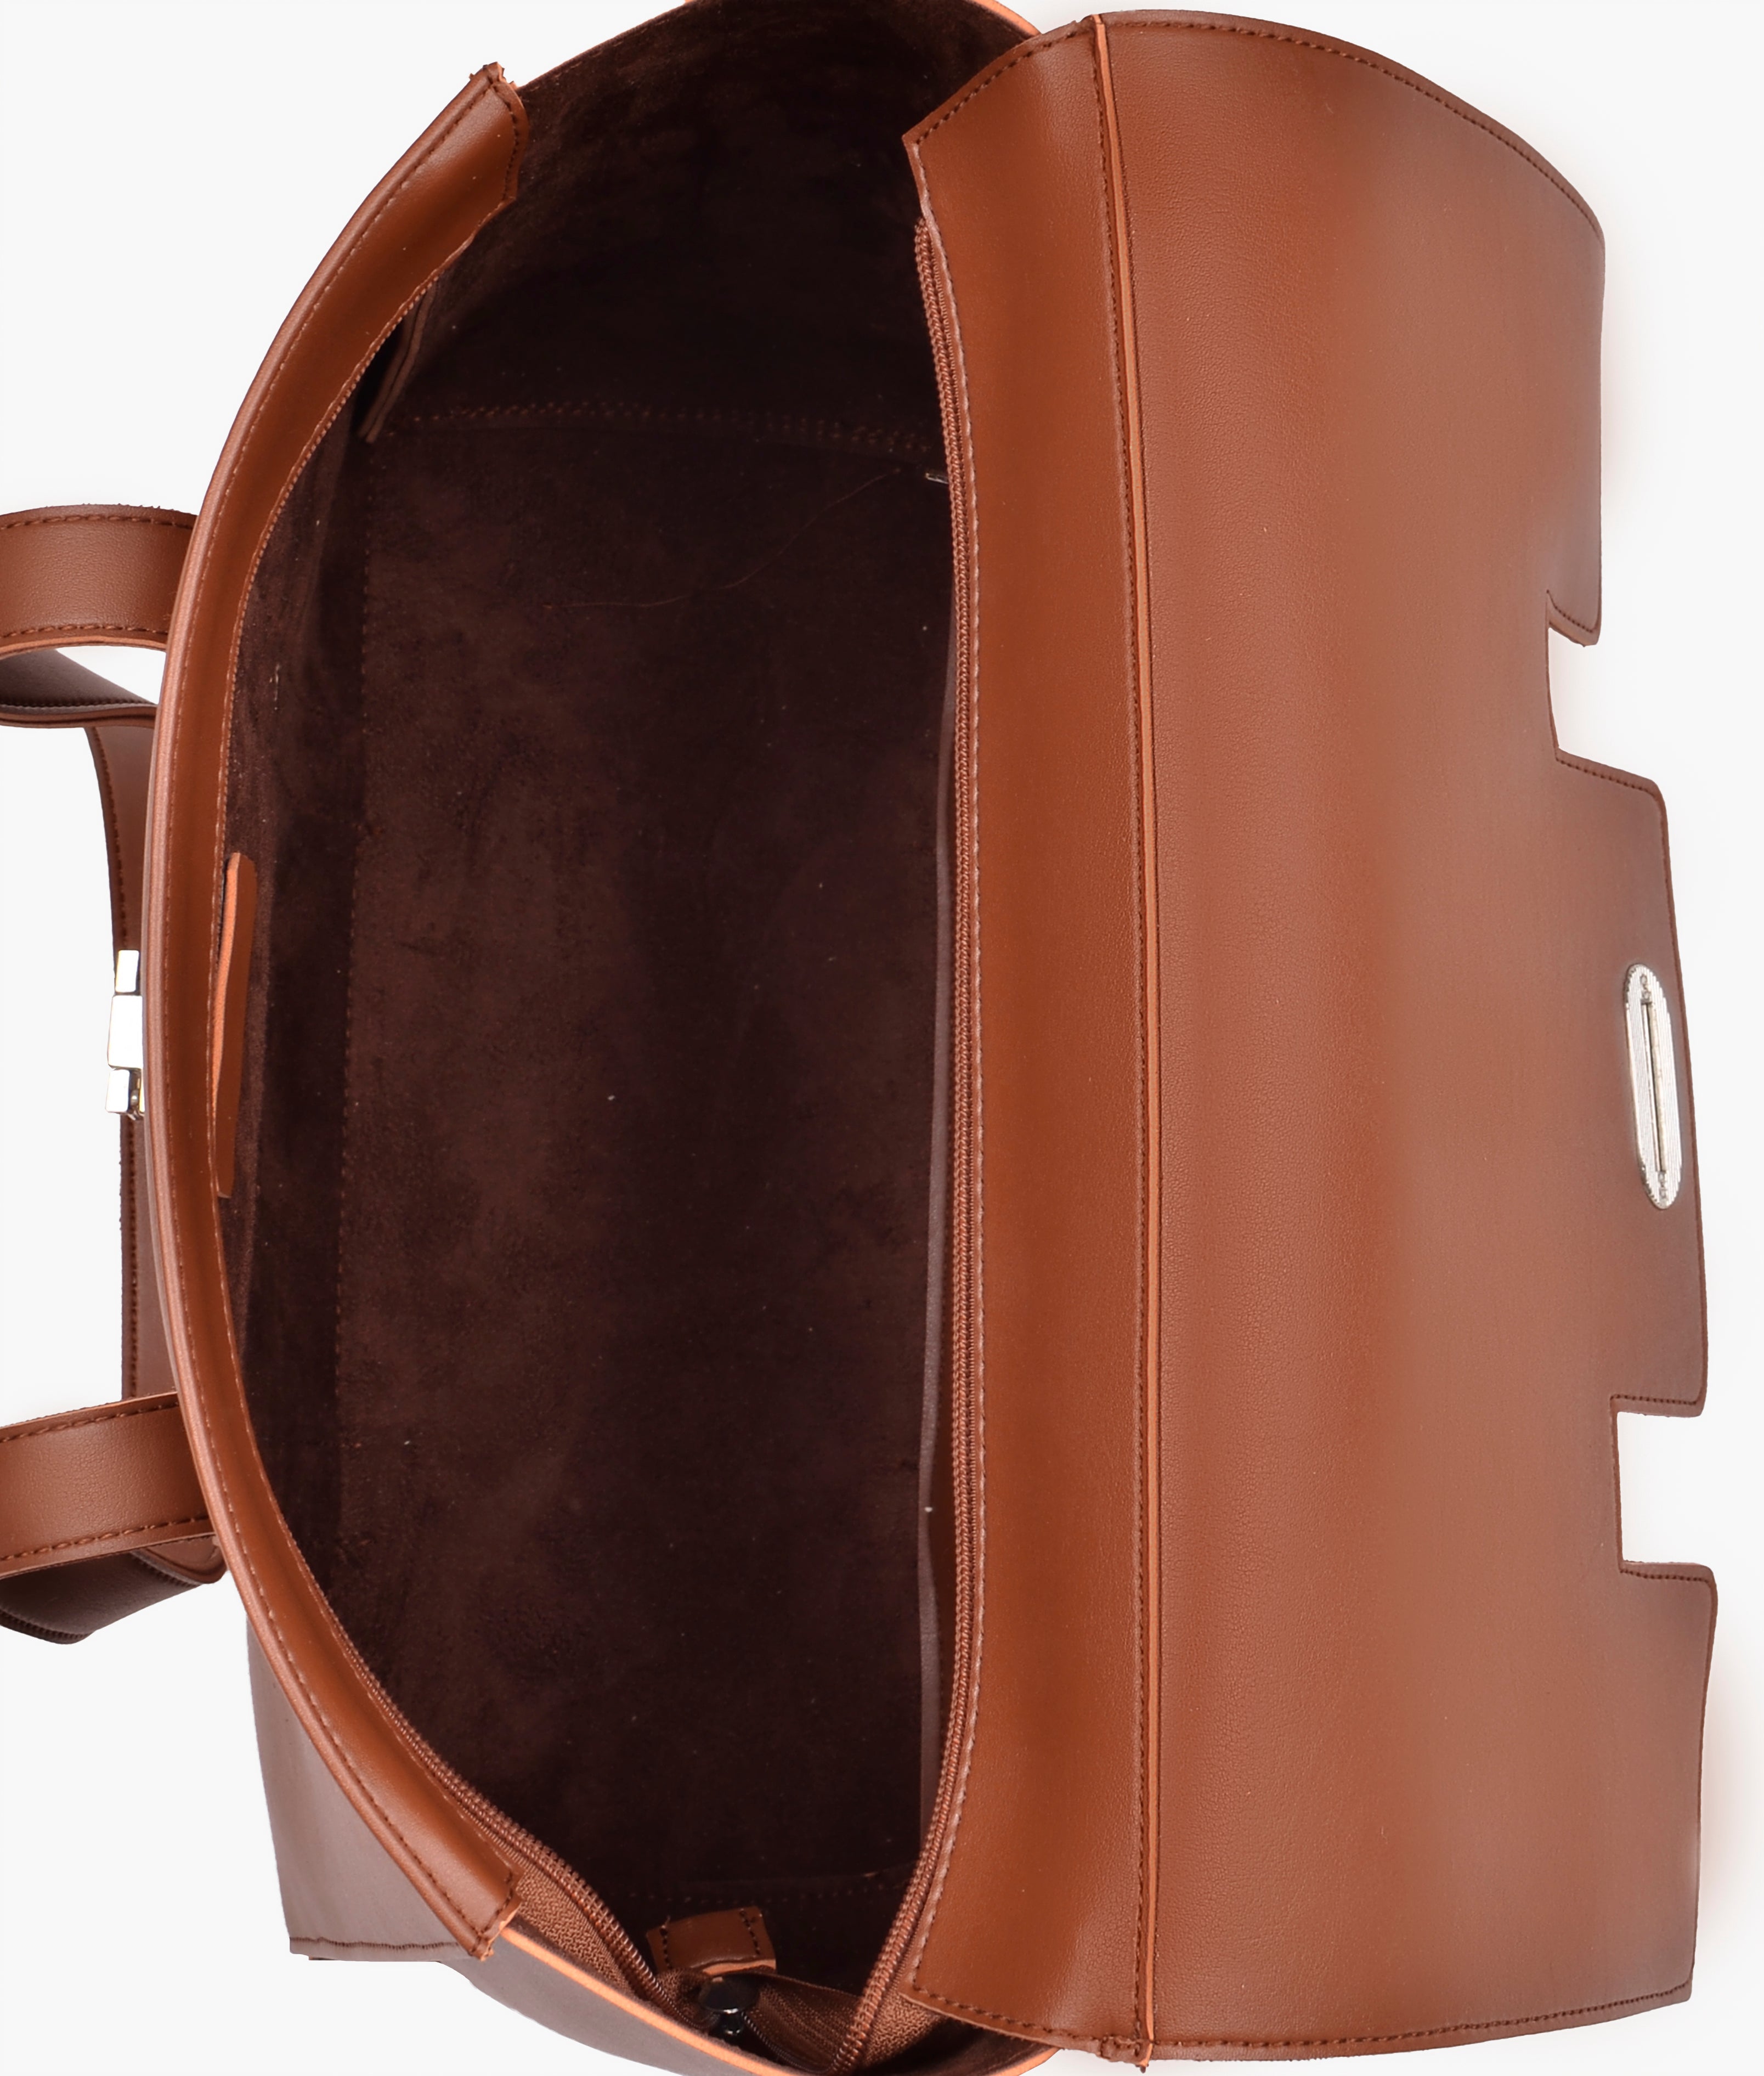 Brown carry-all satchel bag